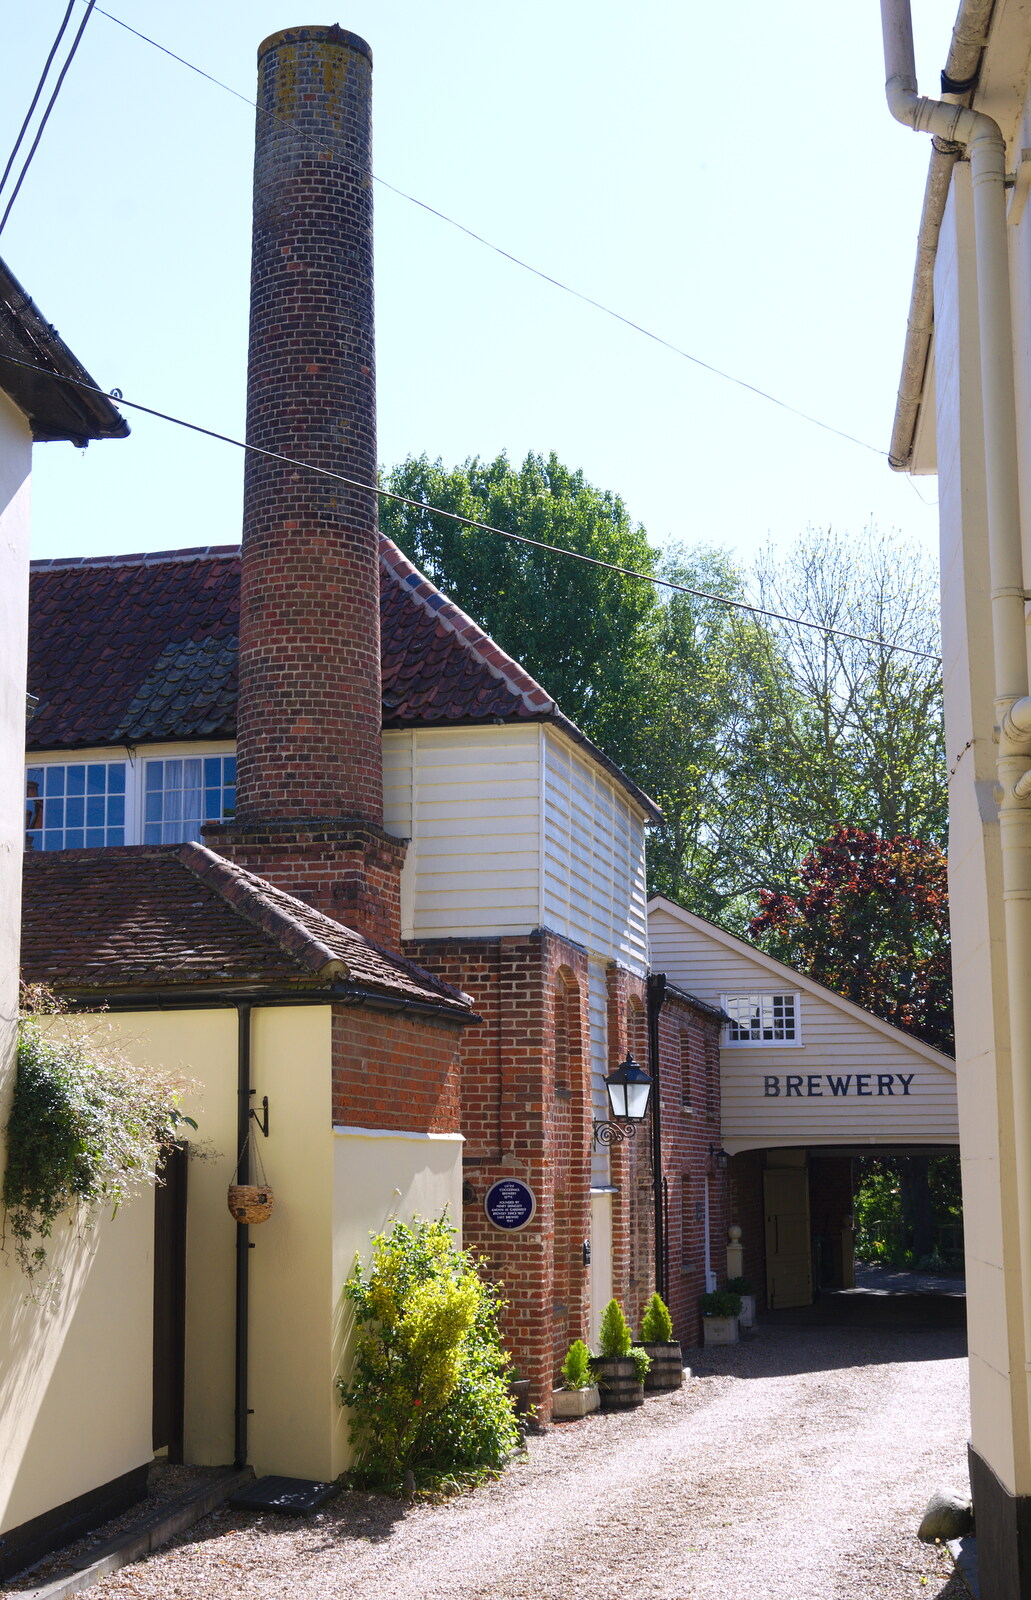 We spot an old brewery on our walkabout from The BSCC Bike Ride 2019, Coggeshall, Essex - 11th May 2019